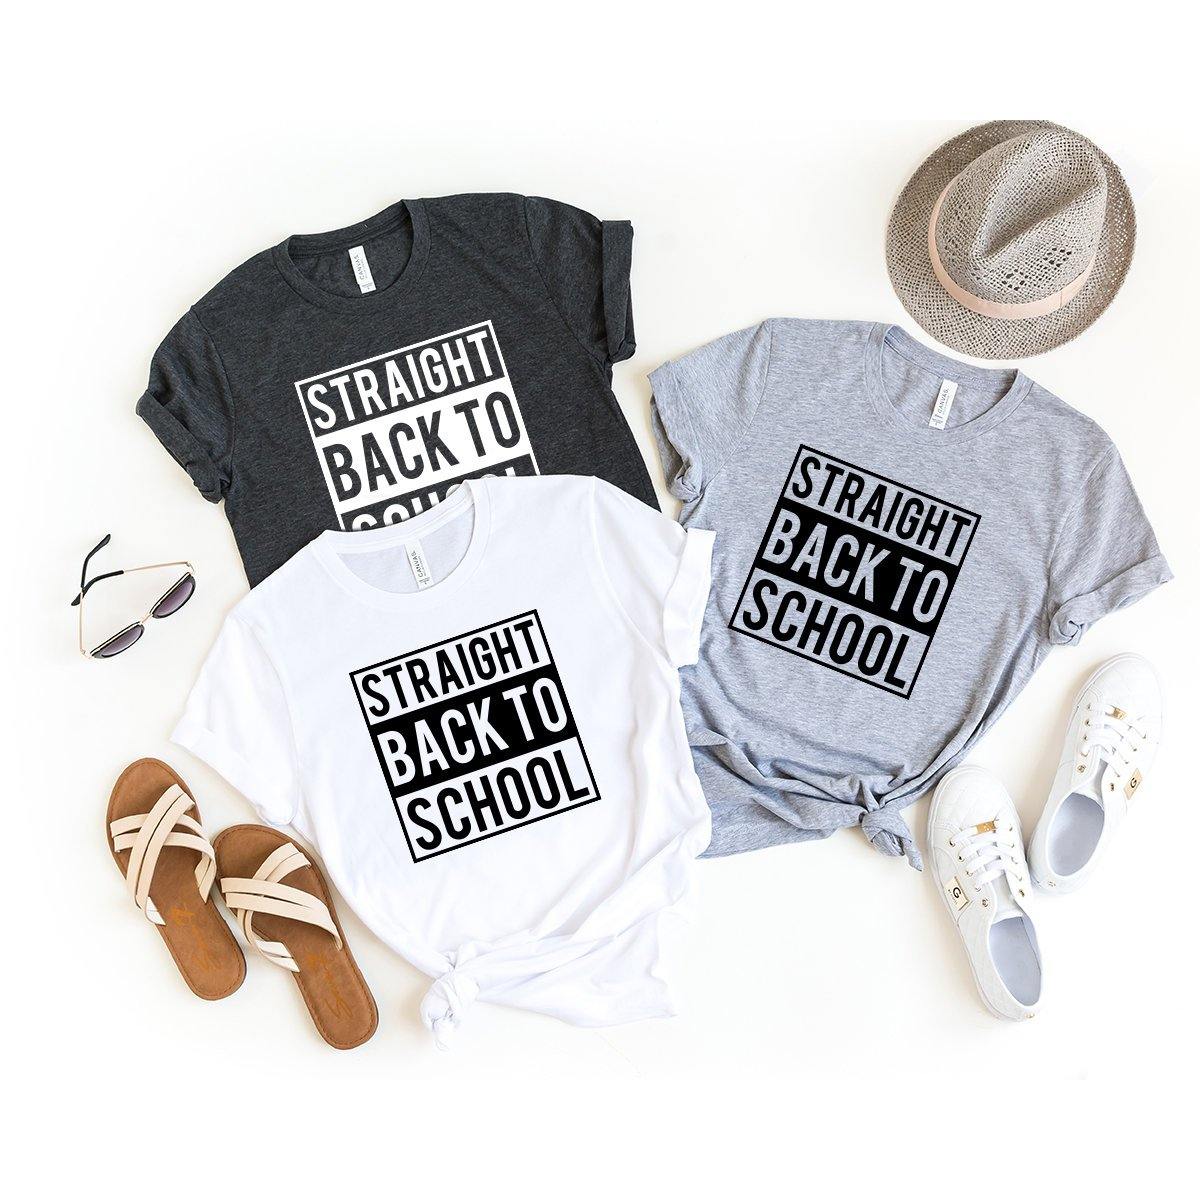 Back To School Shirt, First Day Of School, Funny School Shirt, Teacher Shirt, Funny Teacher Shirt, Home School Shirt - Fastdeliverytees.com